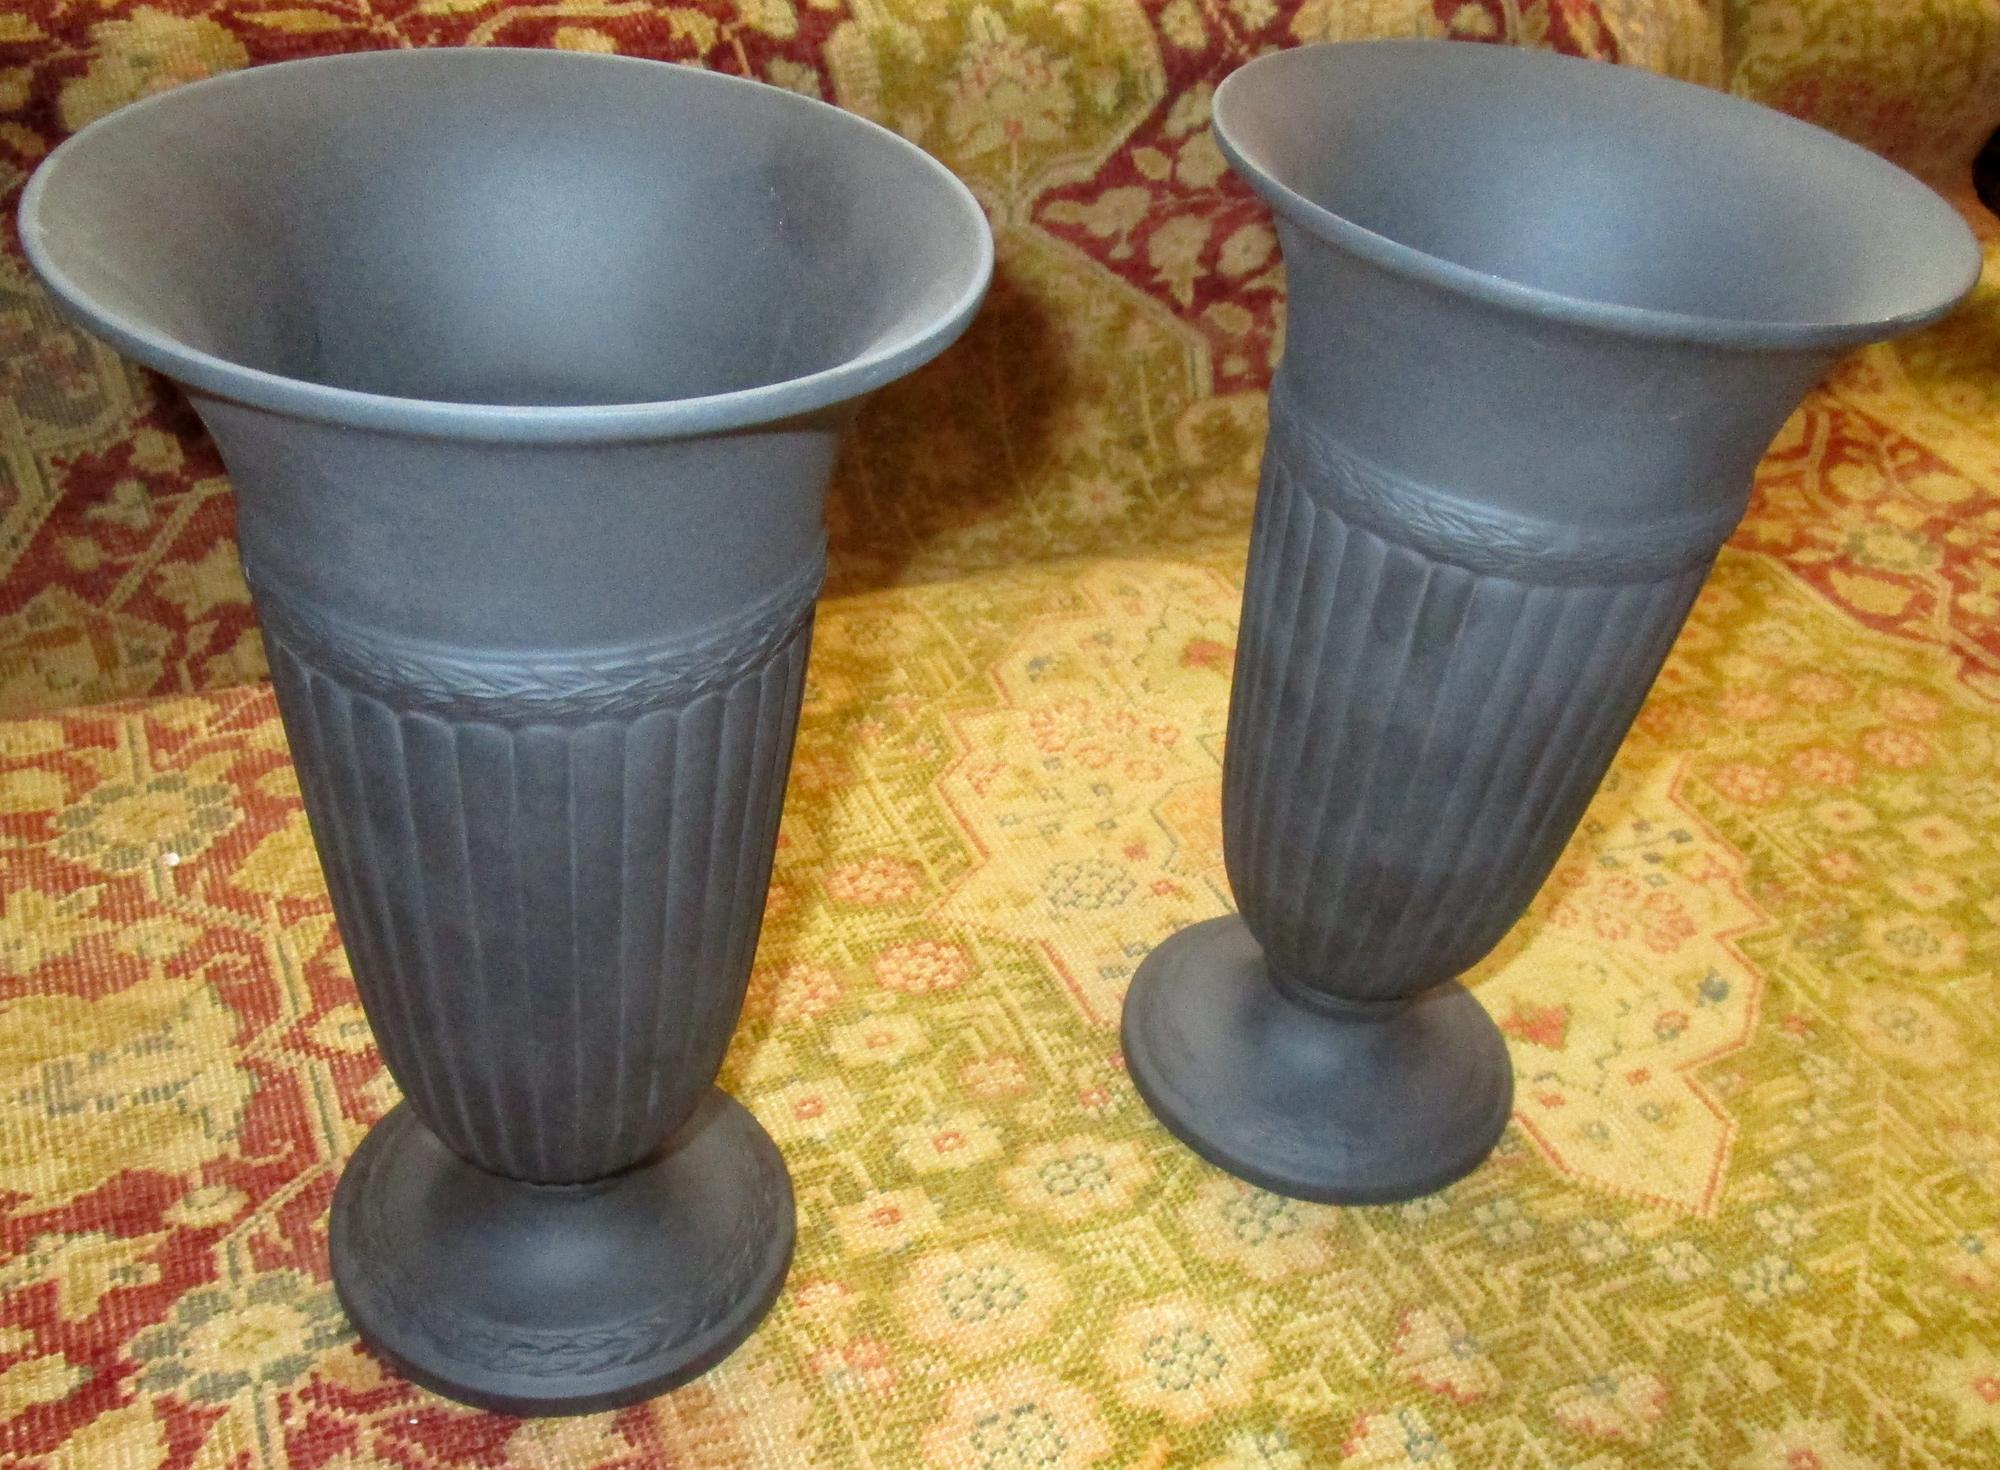 Pair of black basalt Edme Wedgwood vases, the Wedgwood Edme design is reminiscent of the ridges of a clam shell, harking back to Josiah Wedgwood's love of shell collecting. This handsome pair are of a simple style with a laurel wreath around the